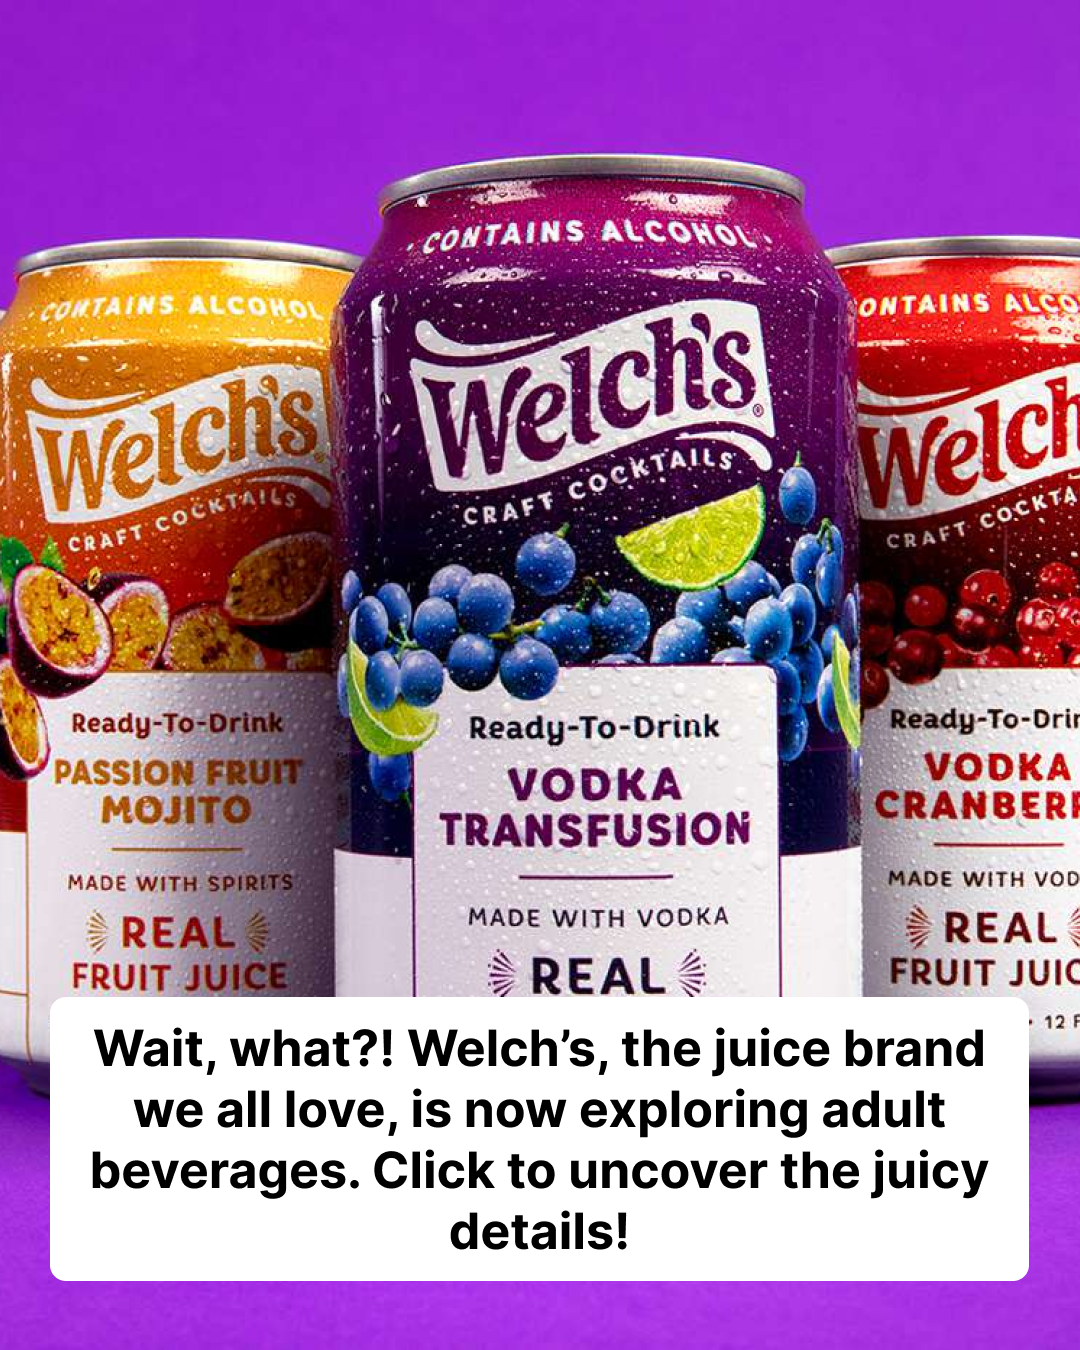 Welch’s Drops ‘Adult-Friendly’ Canned Cocktails in Flavors Like Transfusion and Vodka Cranberry